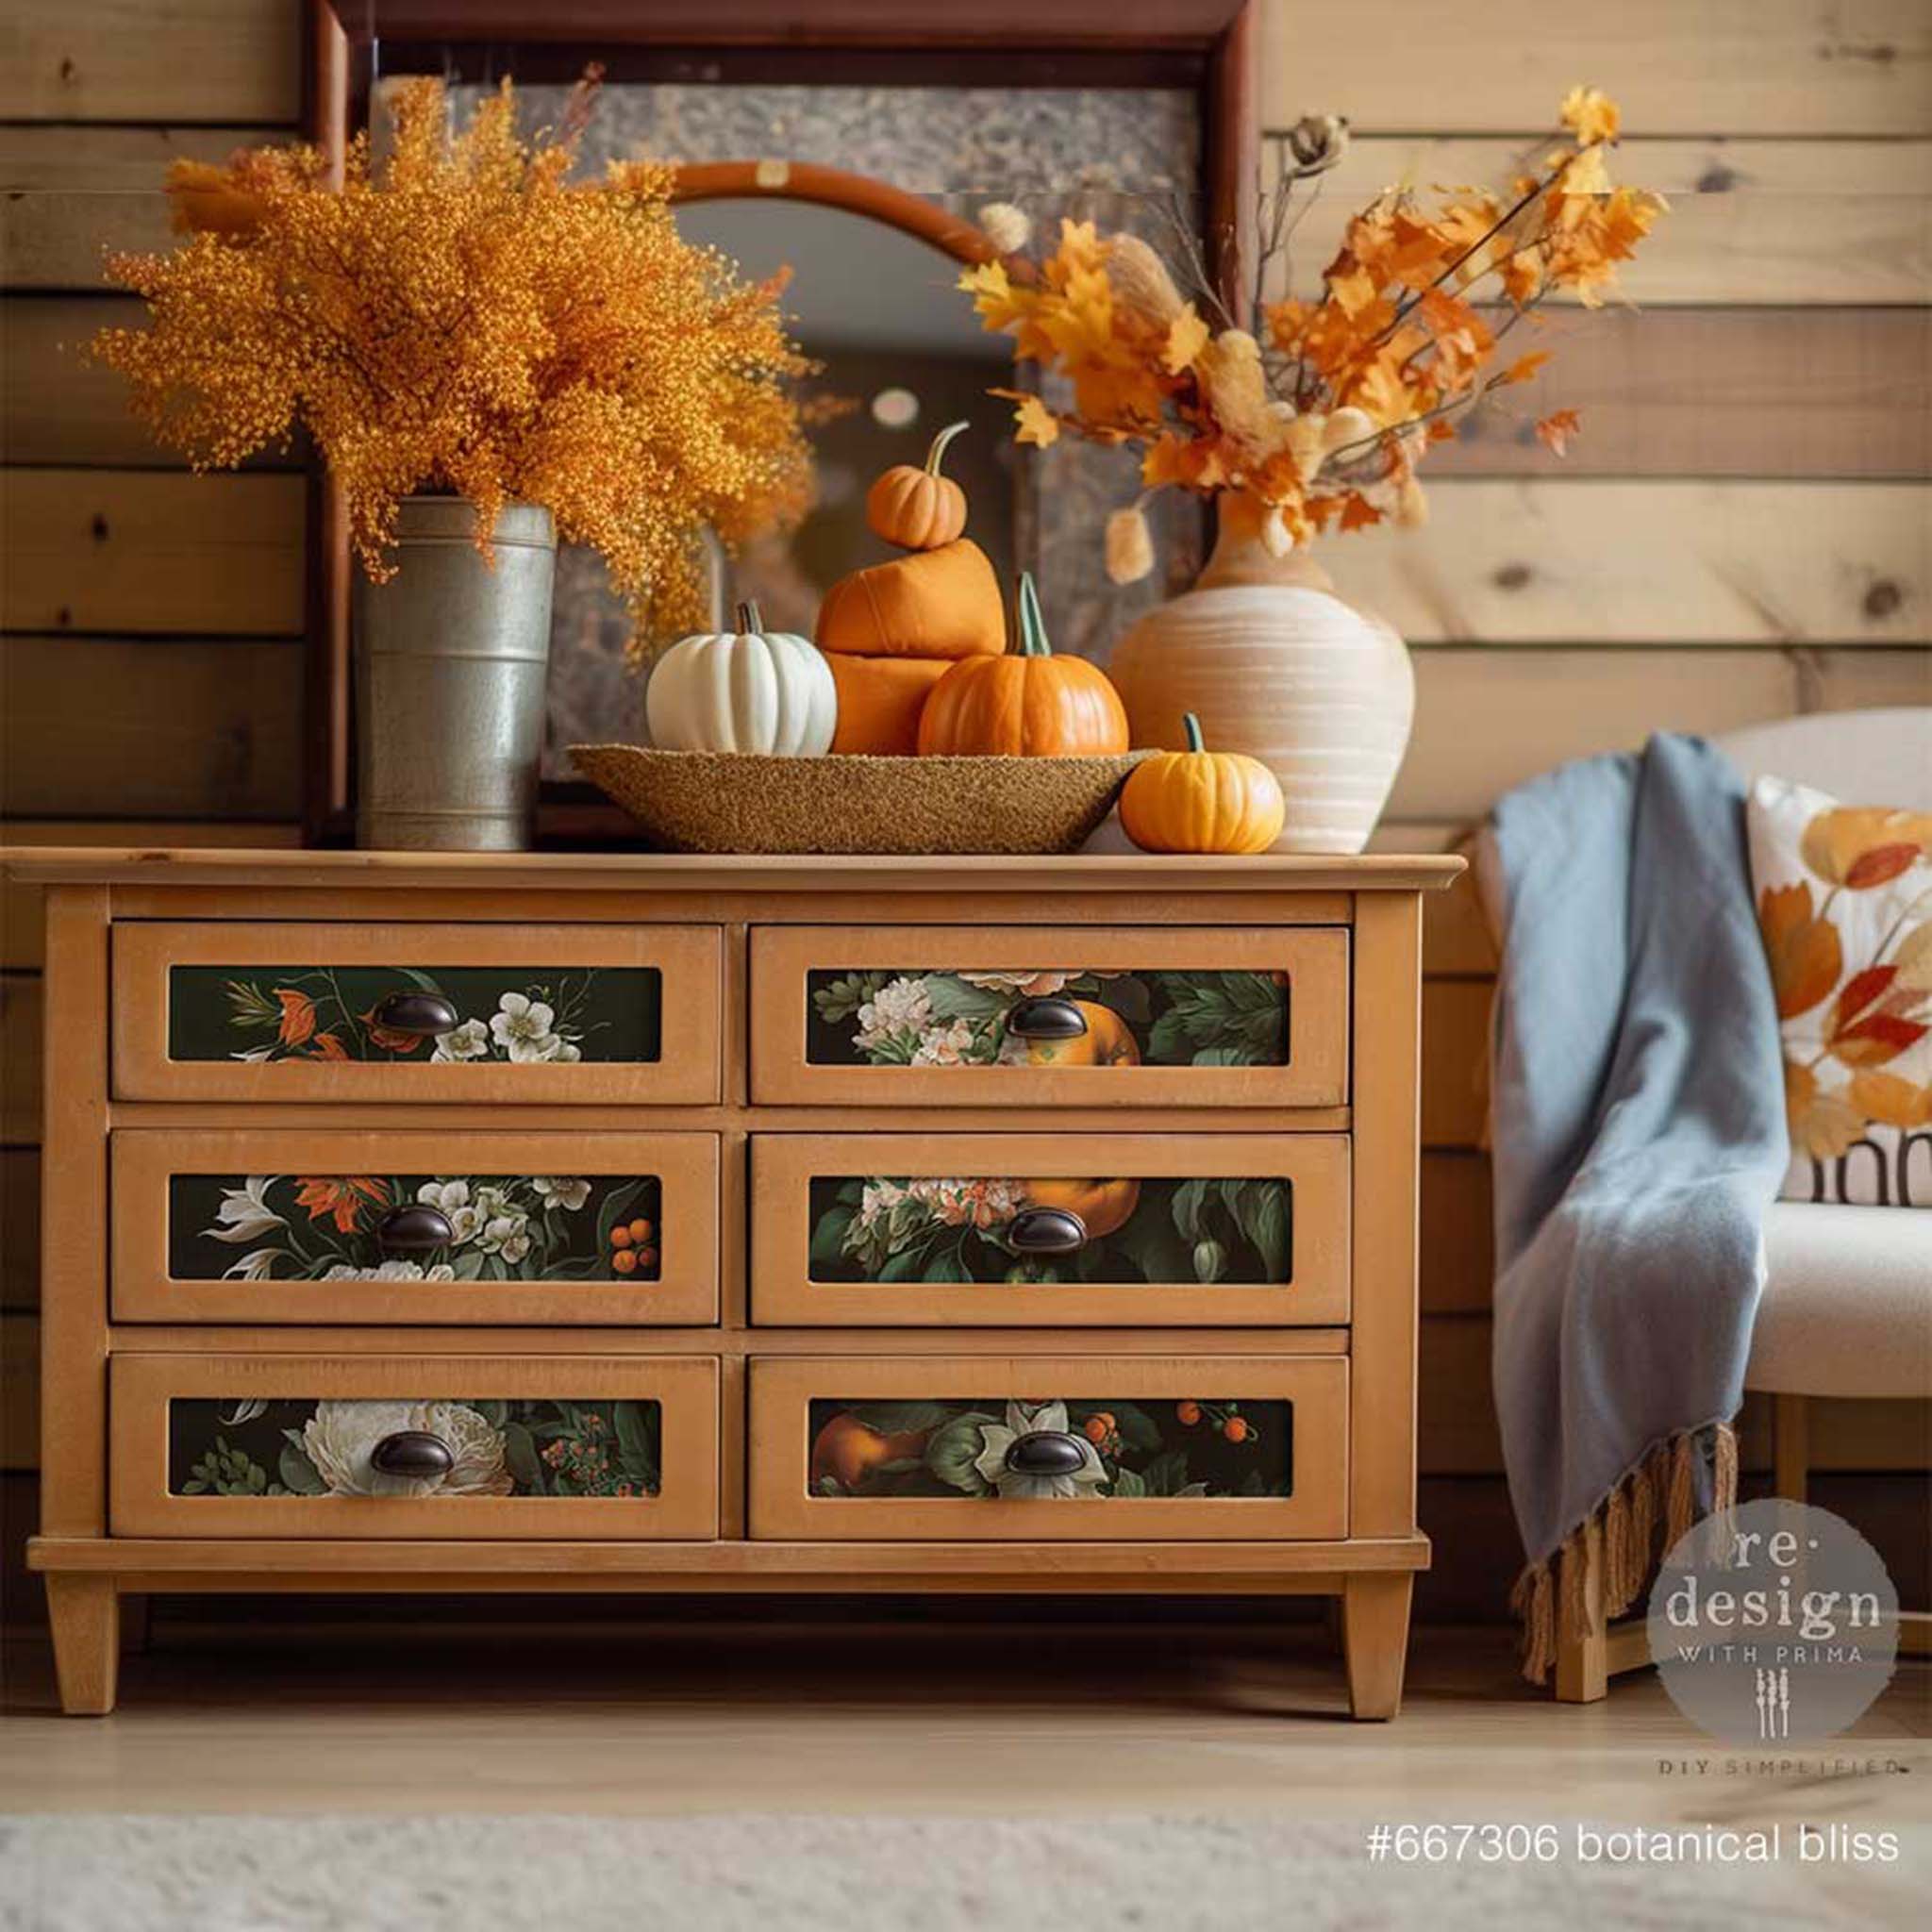 A brown dresser features ReDesign with Prima's Botanical Bliss A1 fiber on its drawer inlays.